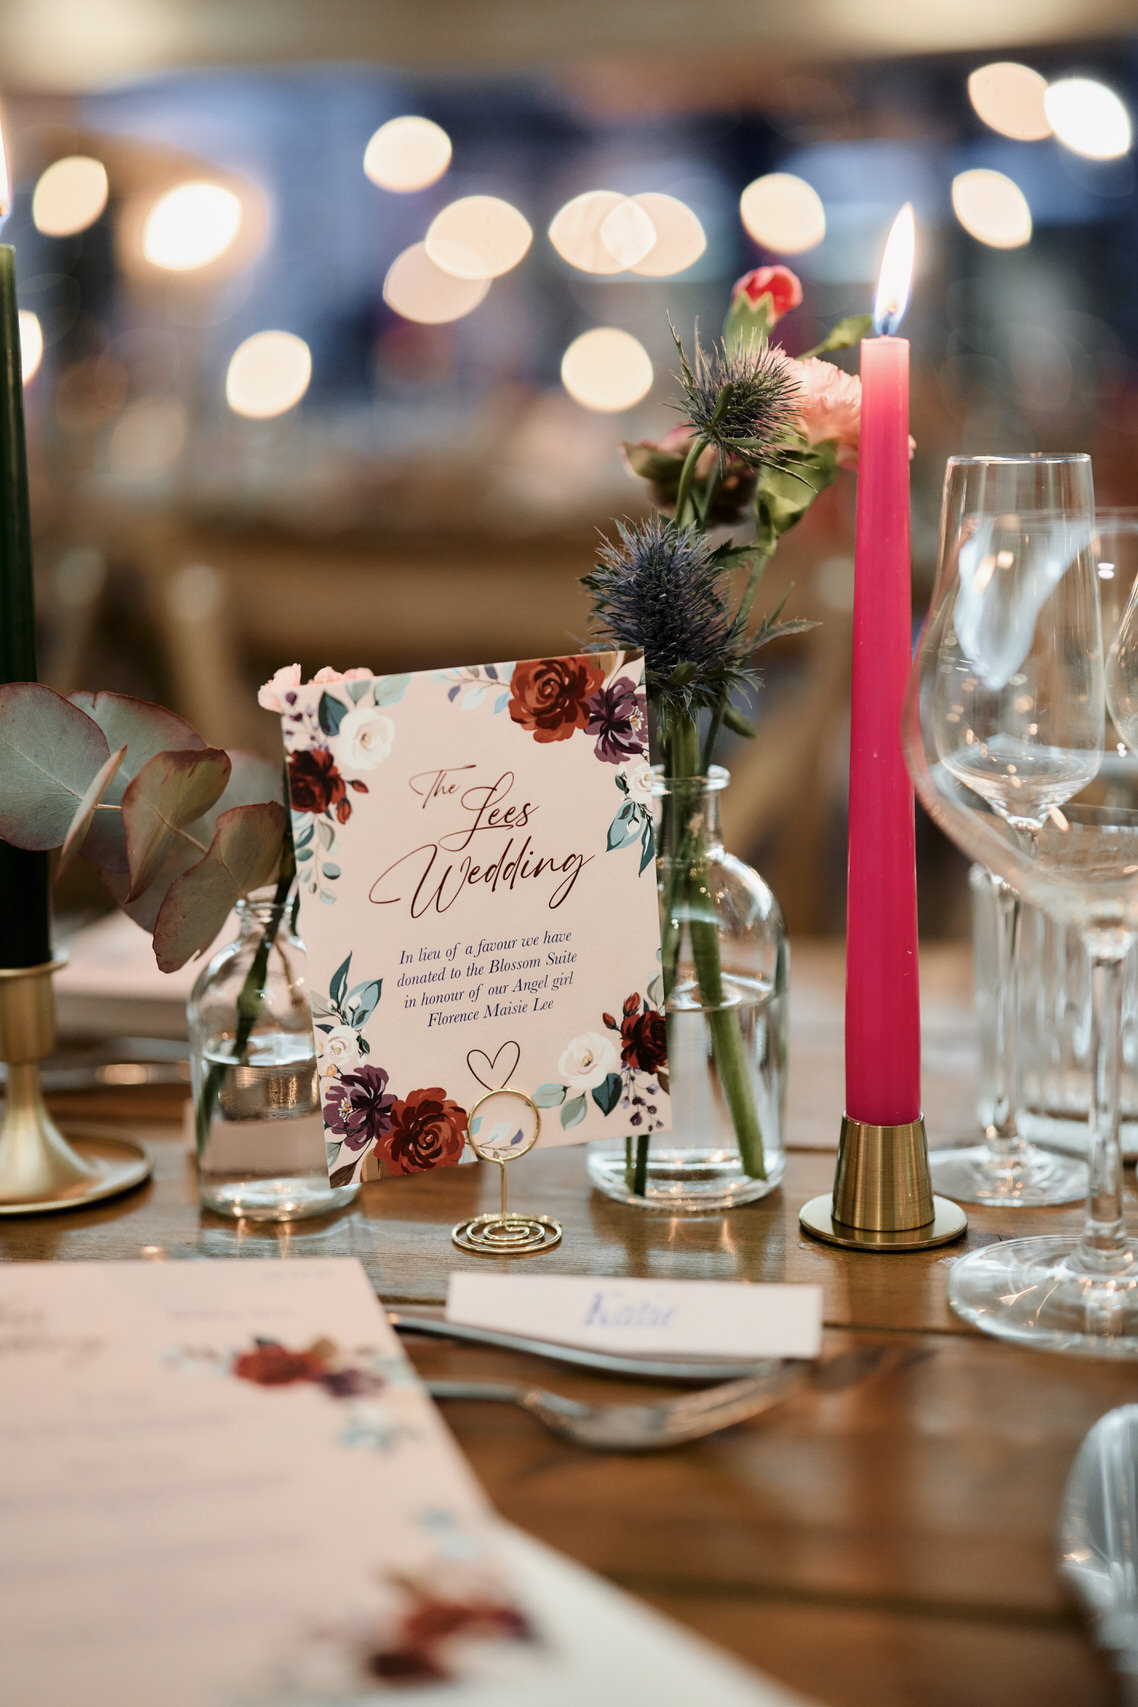 A dinner table setup with candles and a name card.